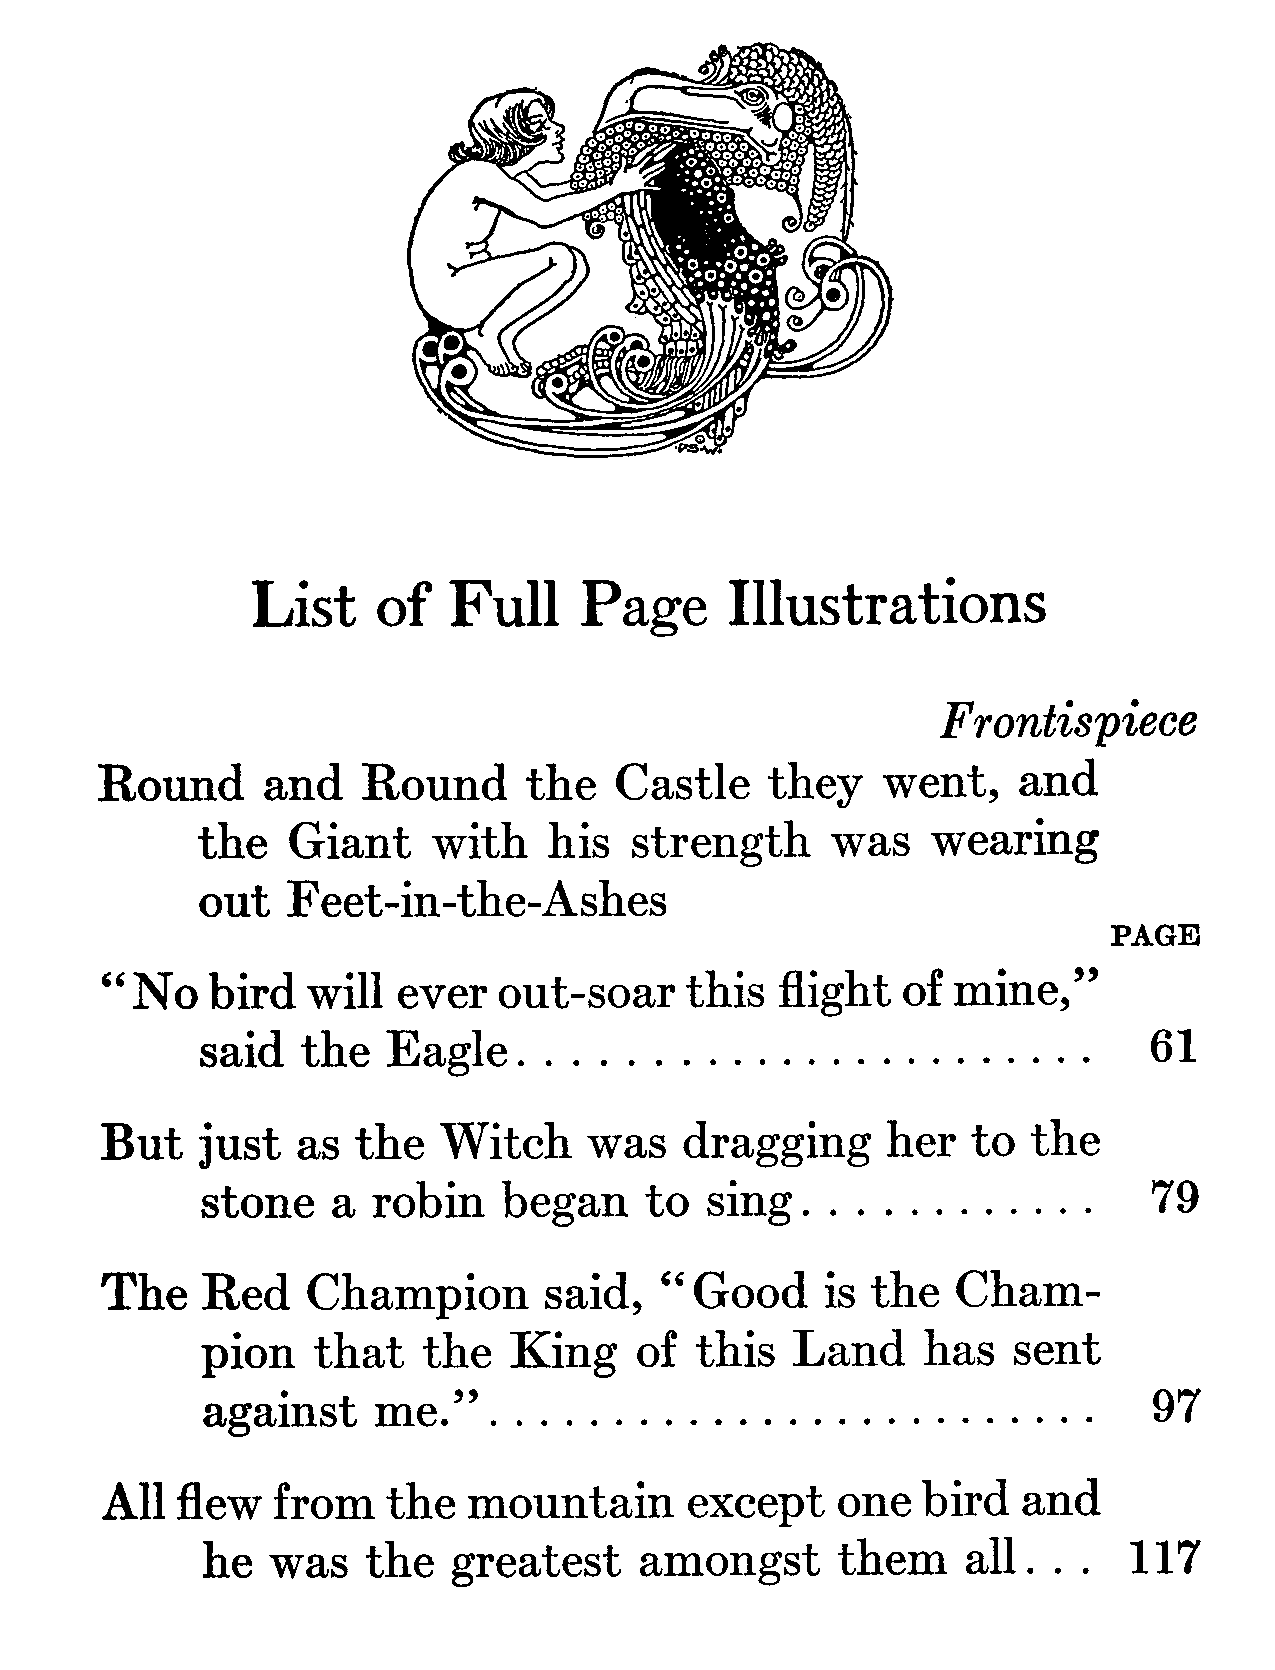 [List of Full Page Illustrations]